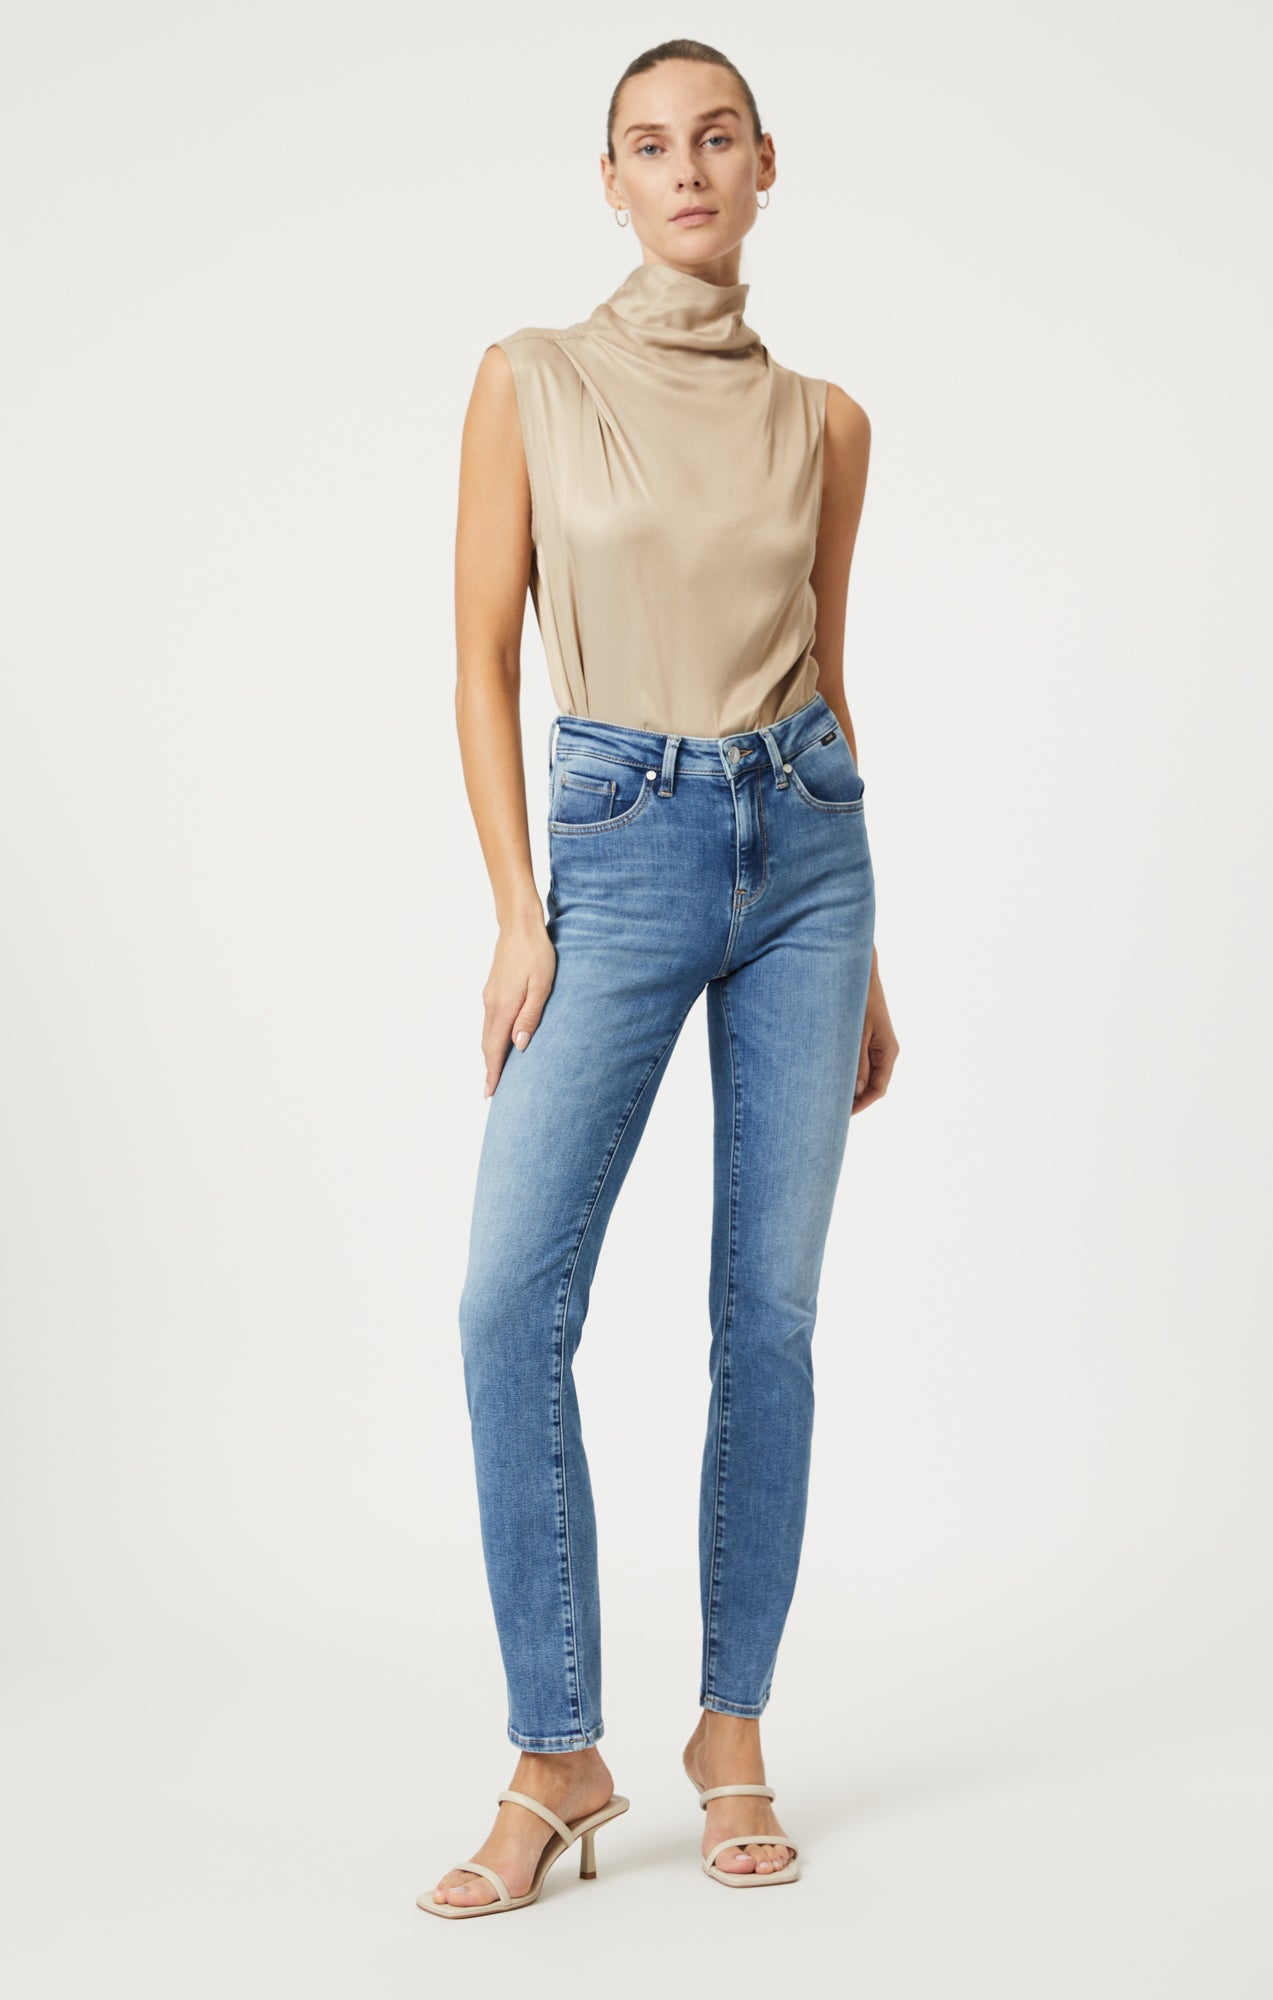 Women's Jeans with 34 Inch Inseams